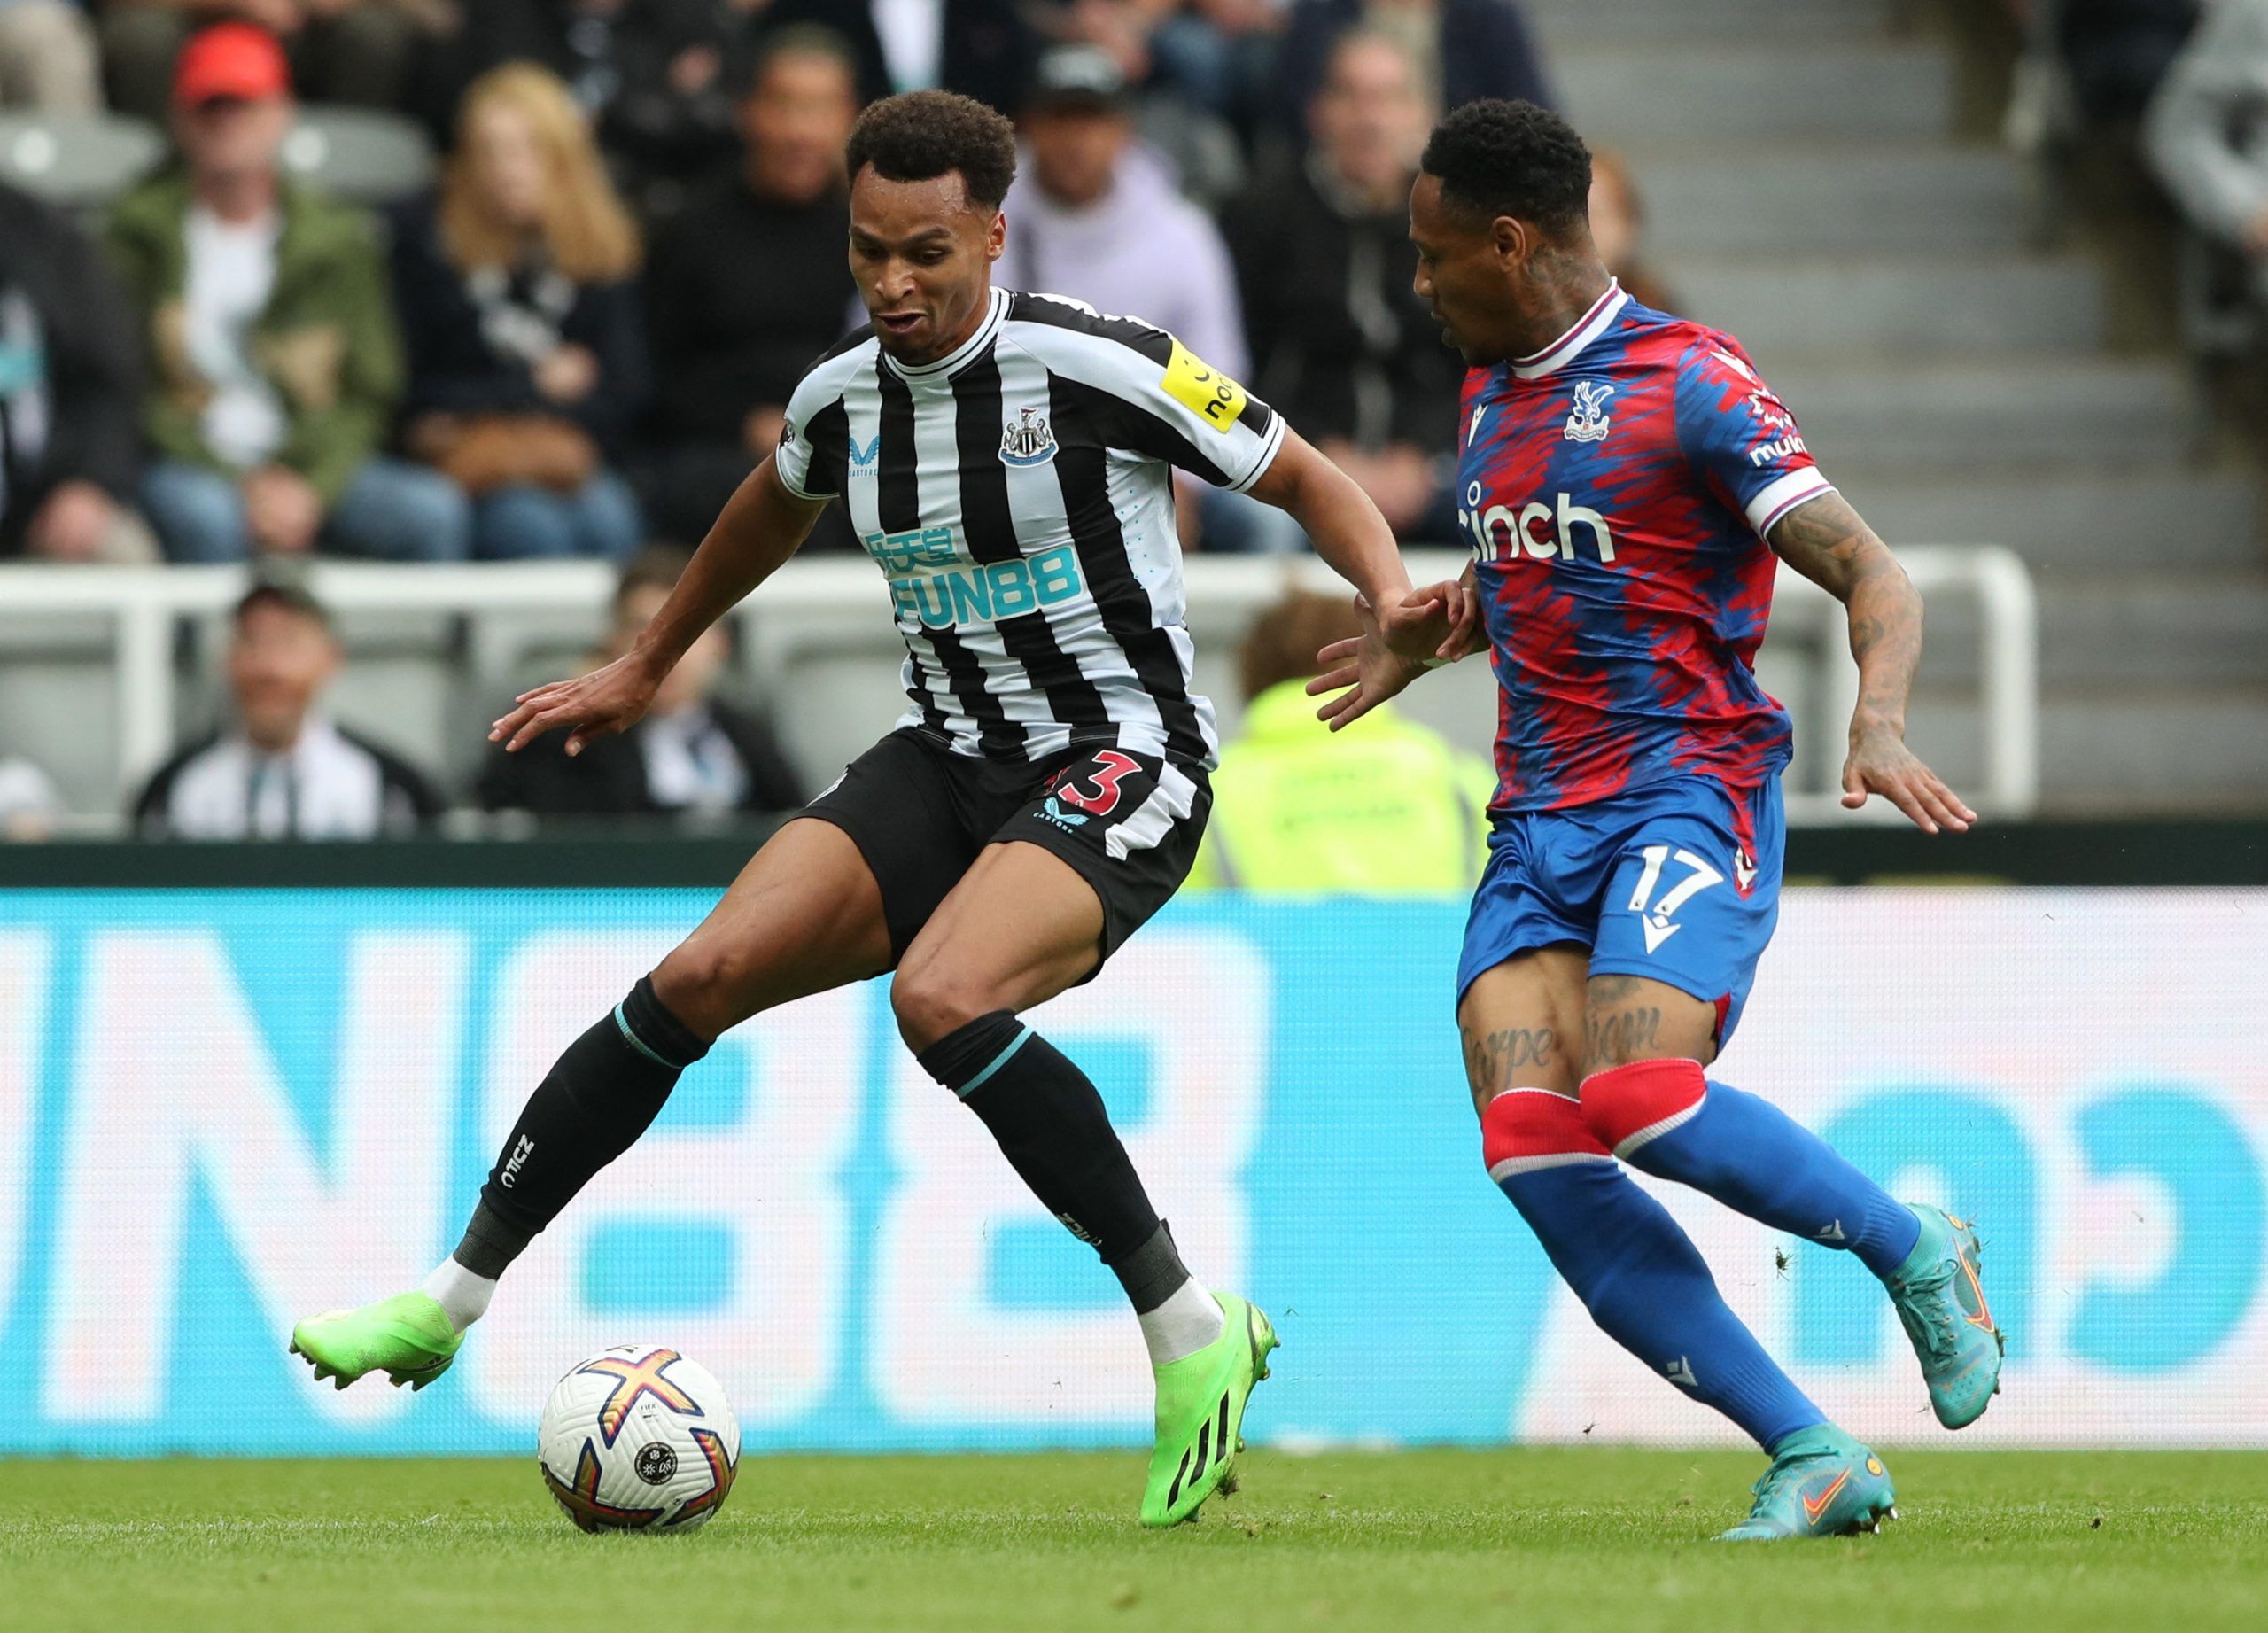 Soccer Football - Premier League - Newcastle United v Crystal Palace - St James' Park, Newcastle, Britain - September 3, 2022 Crystal Palace's Nathaniel Clyne in action with Newcastle United's Jacob Murphy REUTERS/Scott Heppell EDITORIAL USE ONLY. No use with unauthorized audio, video, data, fixture lists, club/league logos or 'live' services. Online in-match use limited to 75 images, no video emulation. No use in betting, games or single club /league/player publications.  Please contact your ac